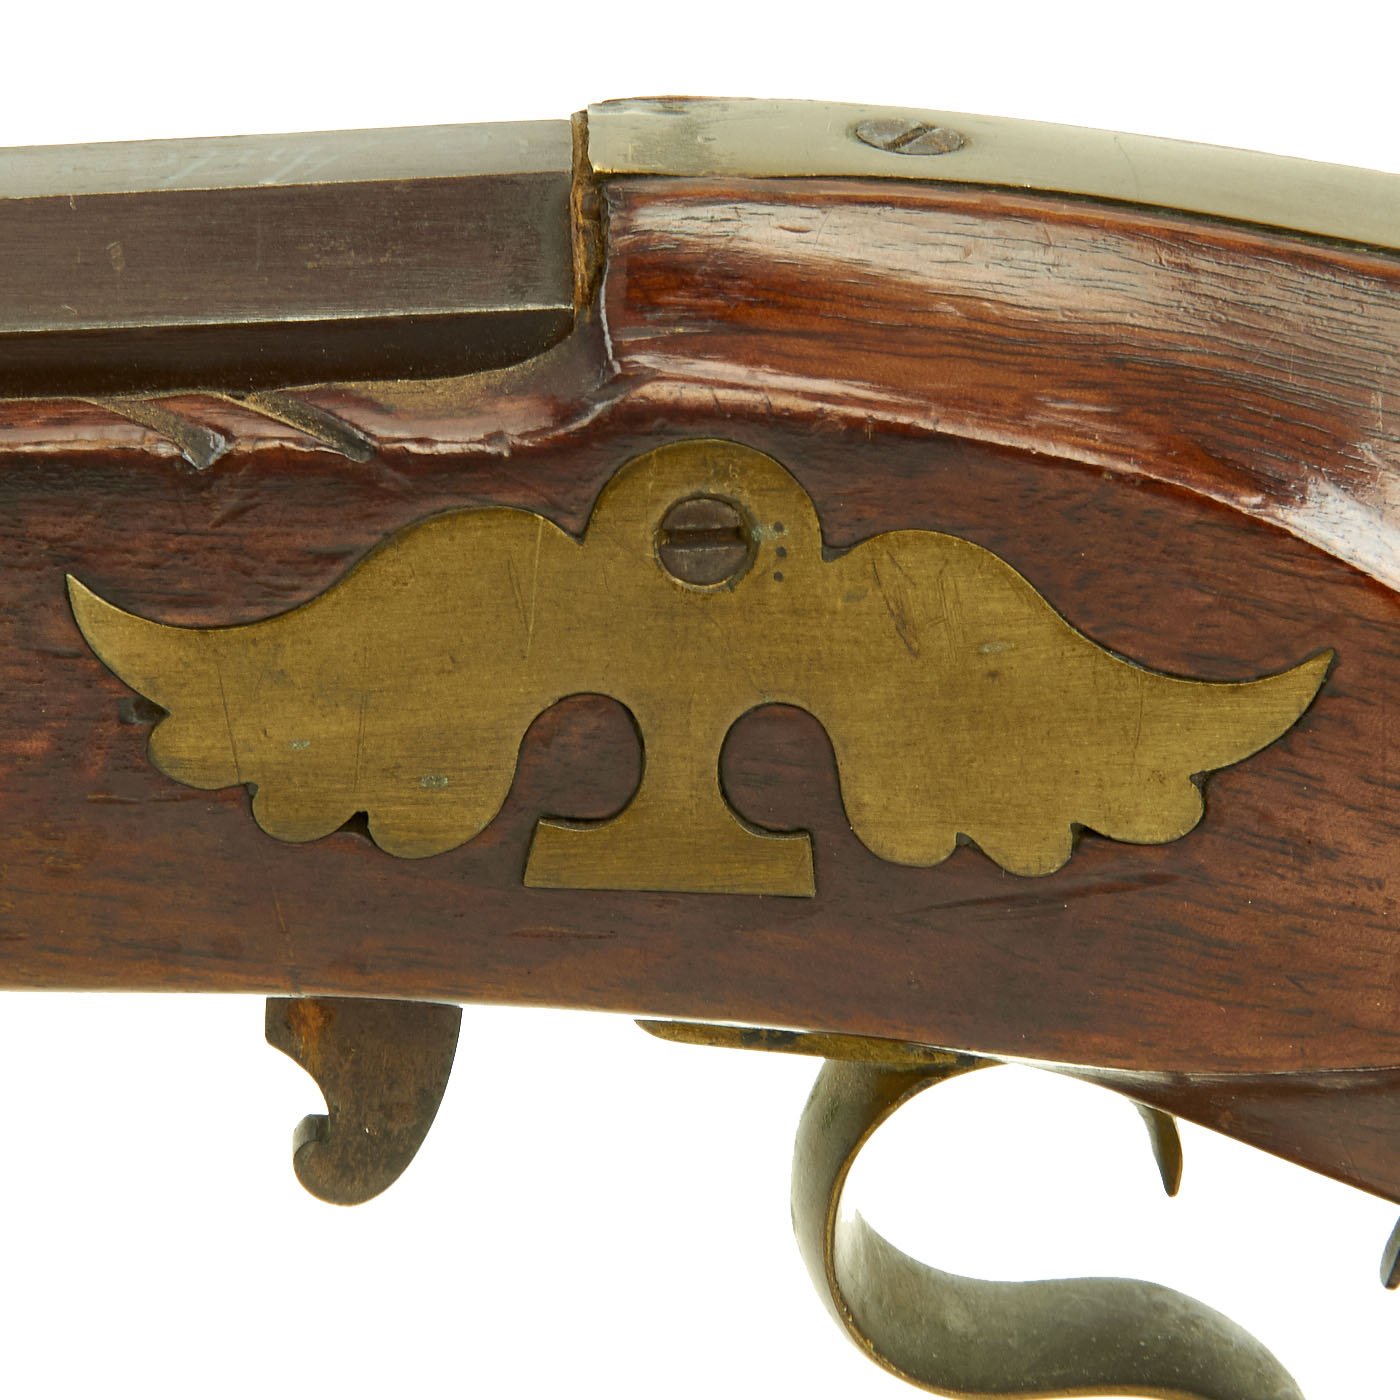 Original 18th Century German Air Rifle with Wheel Lock Style Stock by –  International Military Antiques